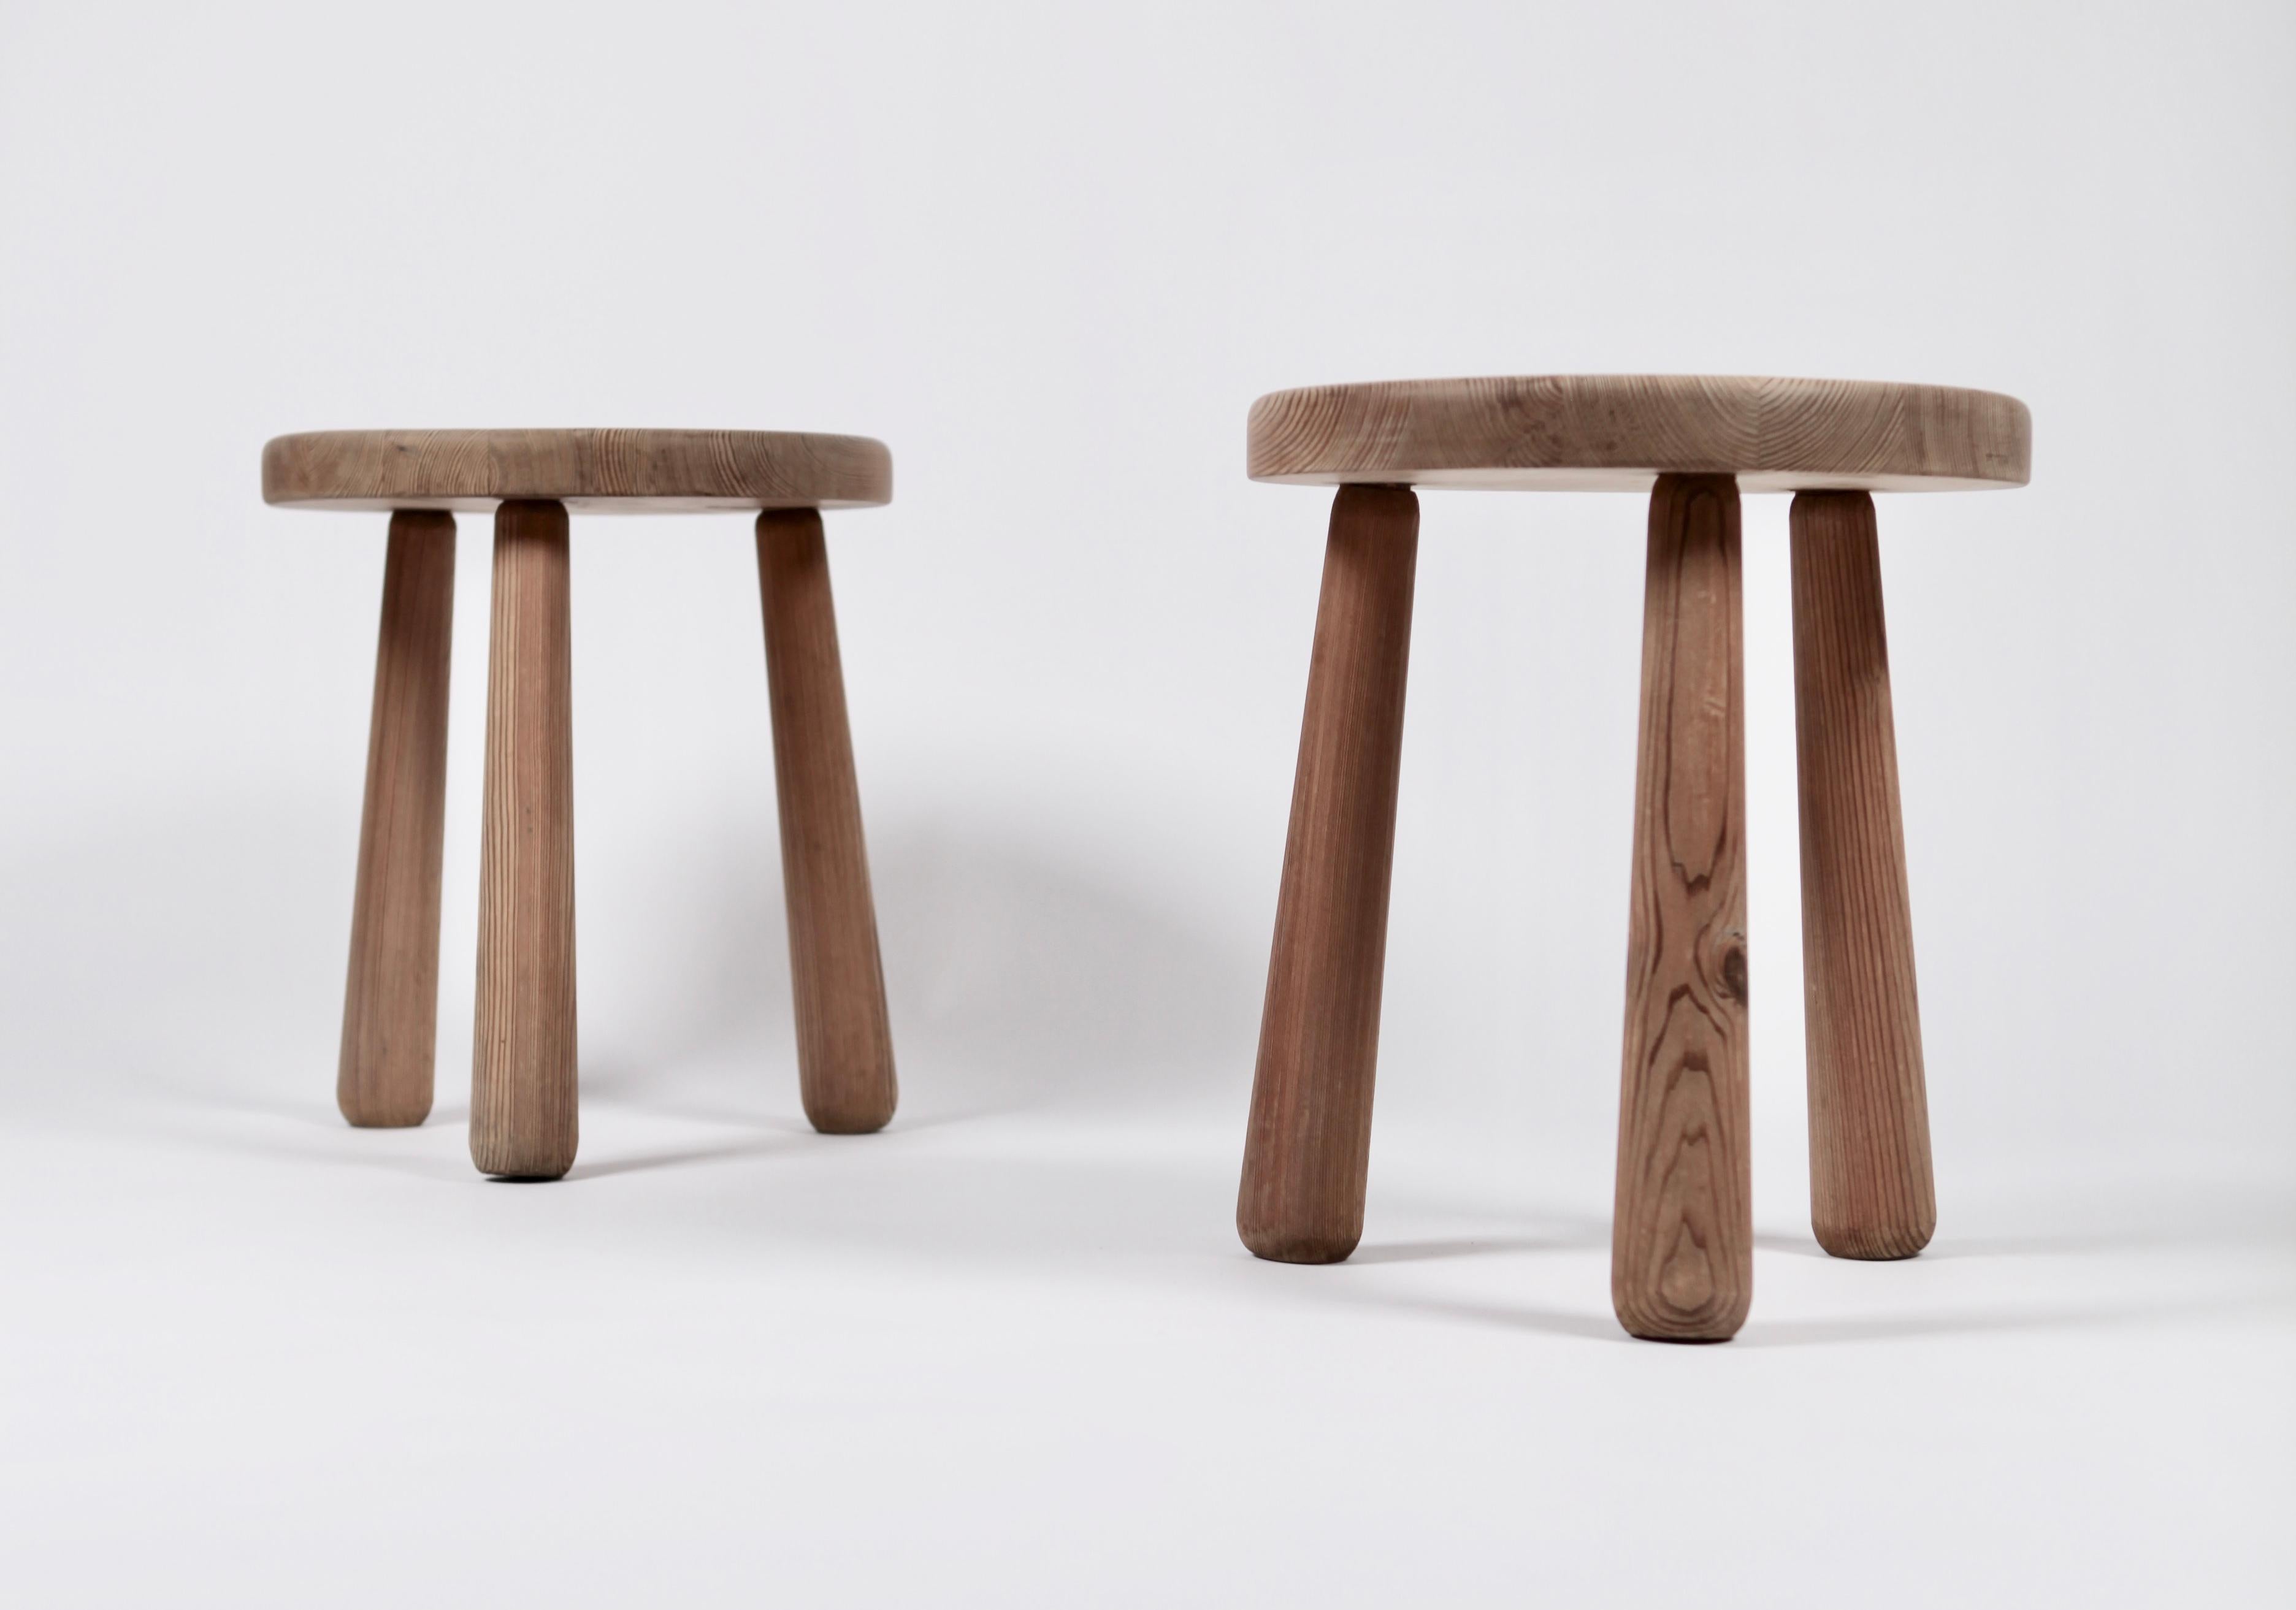 A rare pair of Utö stools by Axel Einar Hjorth.
Executed in 1932 solid stained pine.
Early model with hand carved legs in excellent vintage condition.
Manufactured by Nordiska Kompaniet in Sweden, 1932.
Lit: Signum, Axel Einar Hjorth,